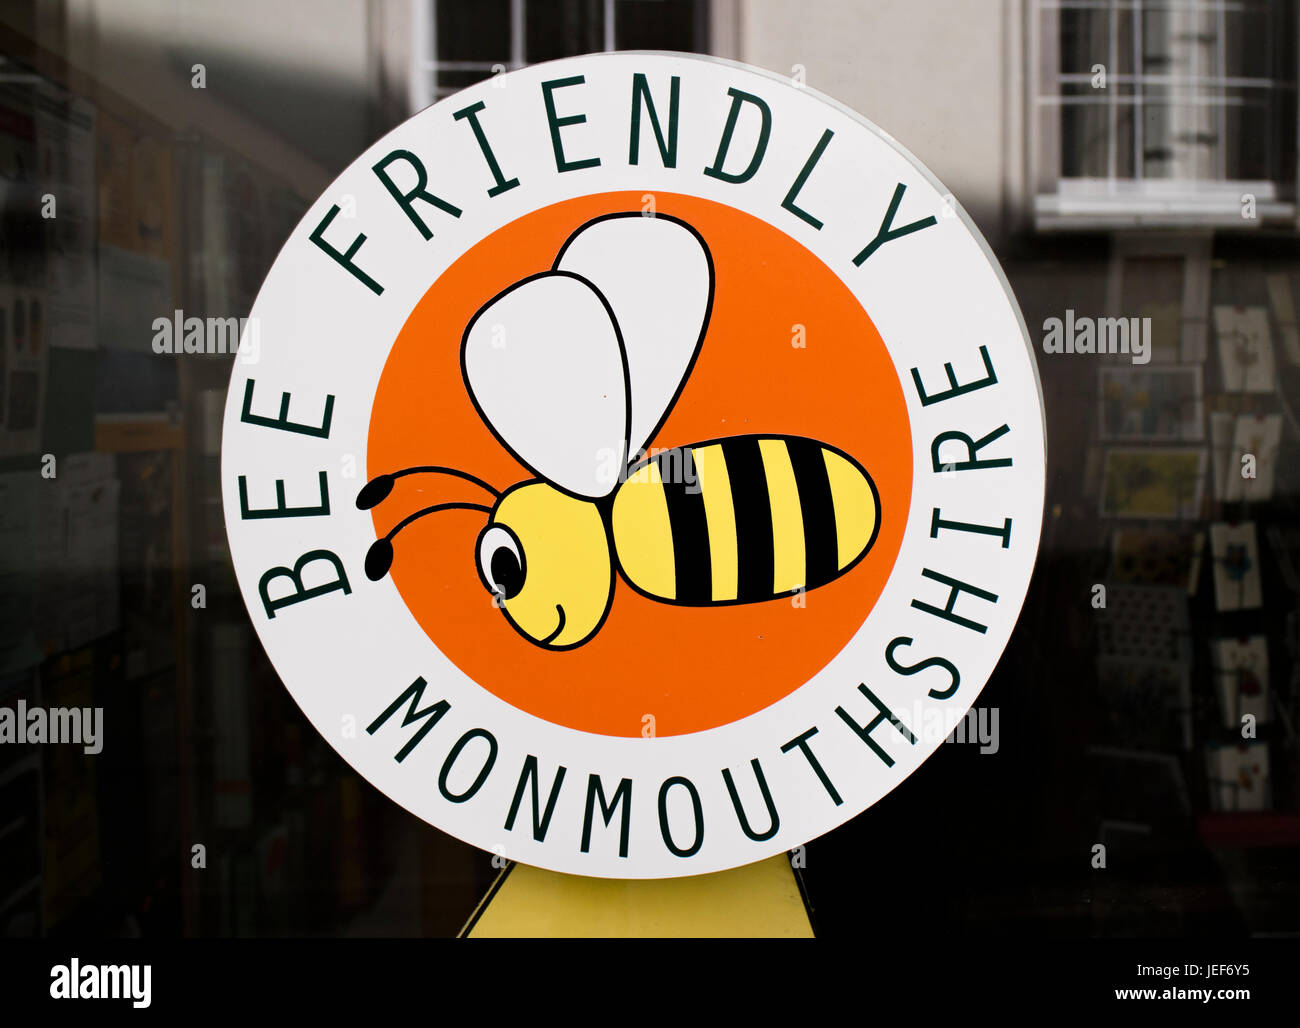 Bee friendly sign in Monmouth, Monmouthshire, Wales, UK Stock Photo